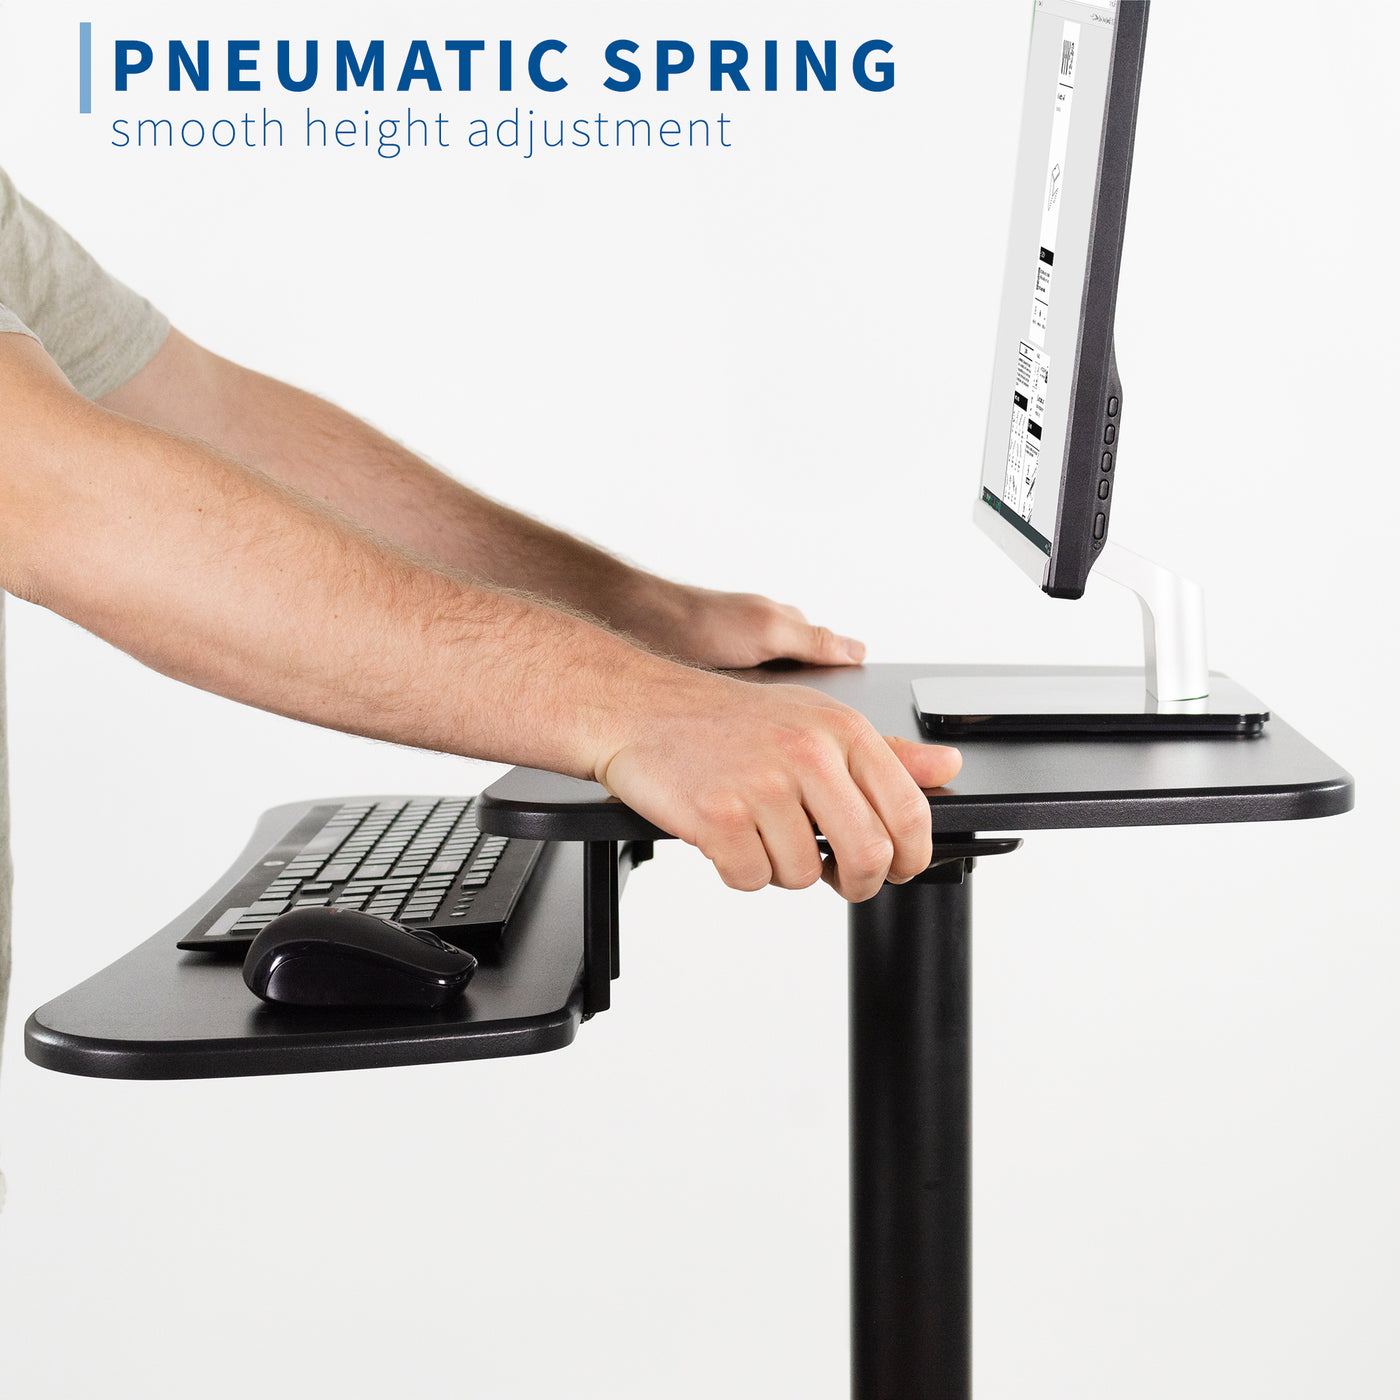 Ergonomic mobile computer workstation cart with height adjustment.